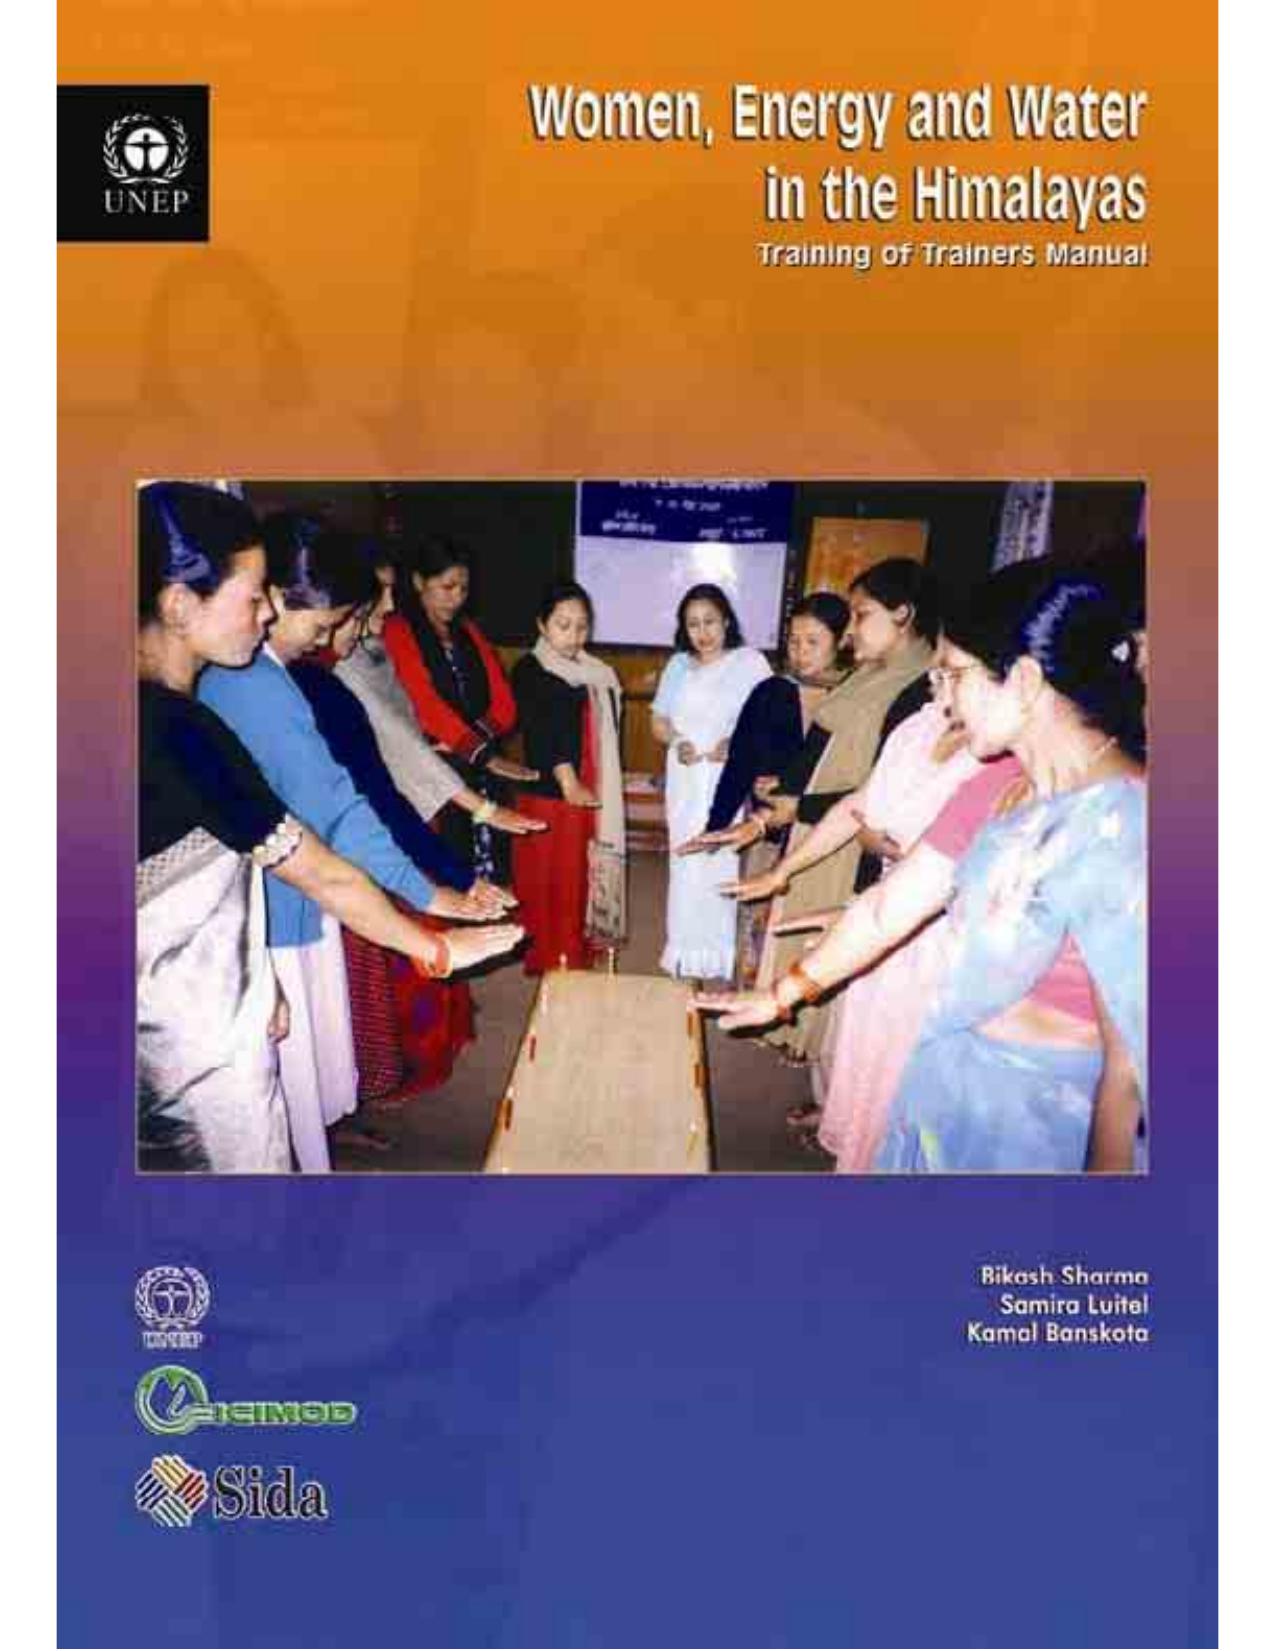 Women, Energy and Water in the Himalayas: Training of Trainers Manual